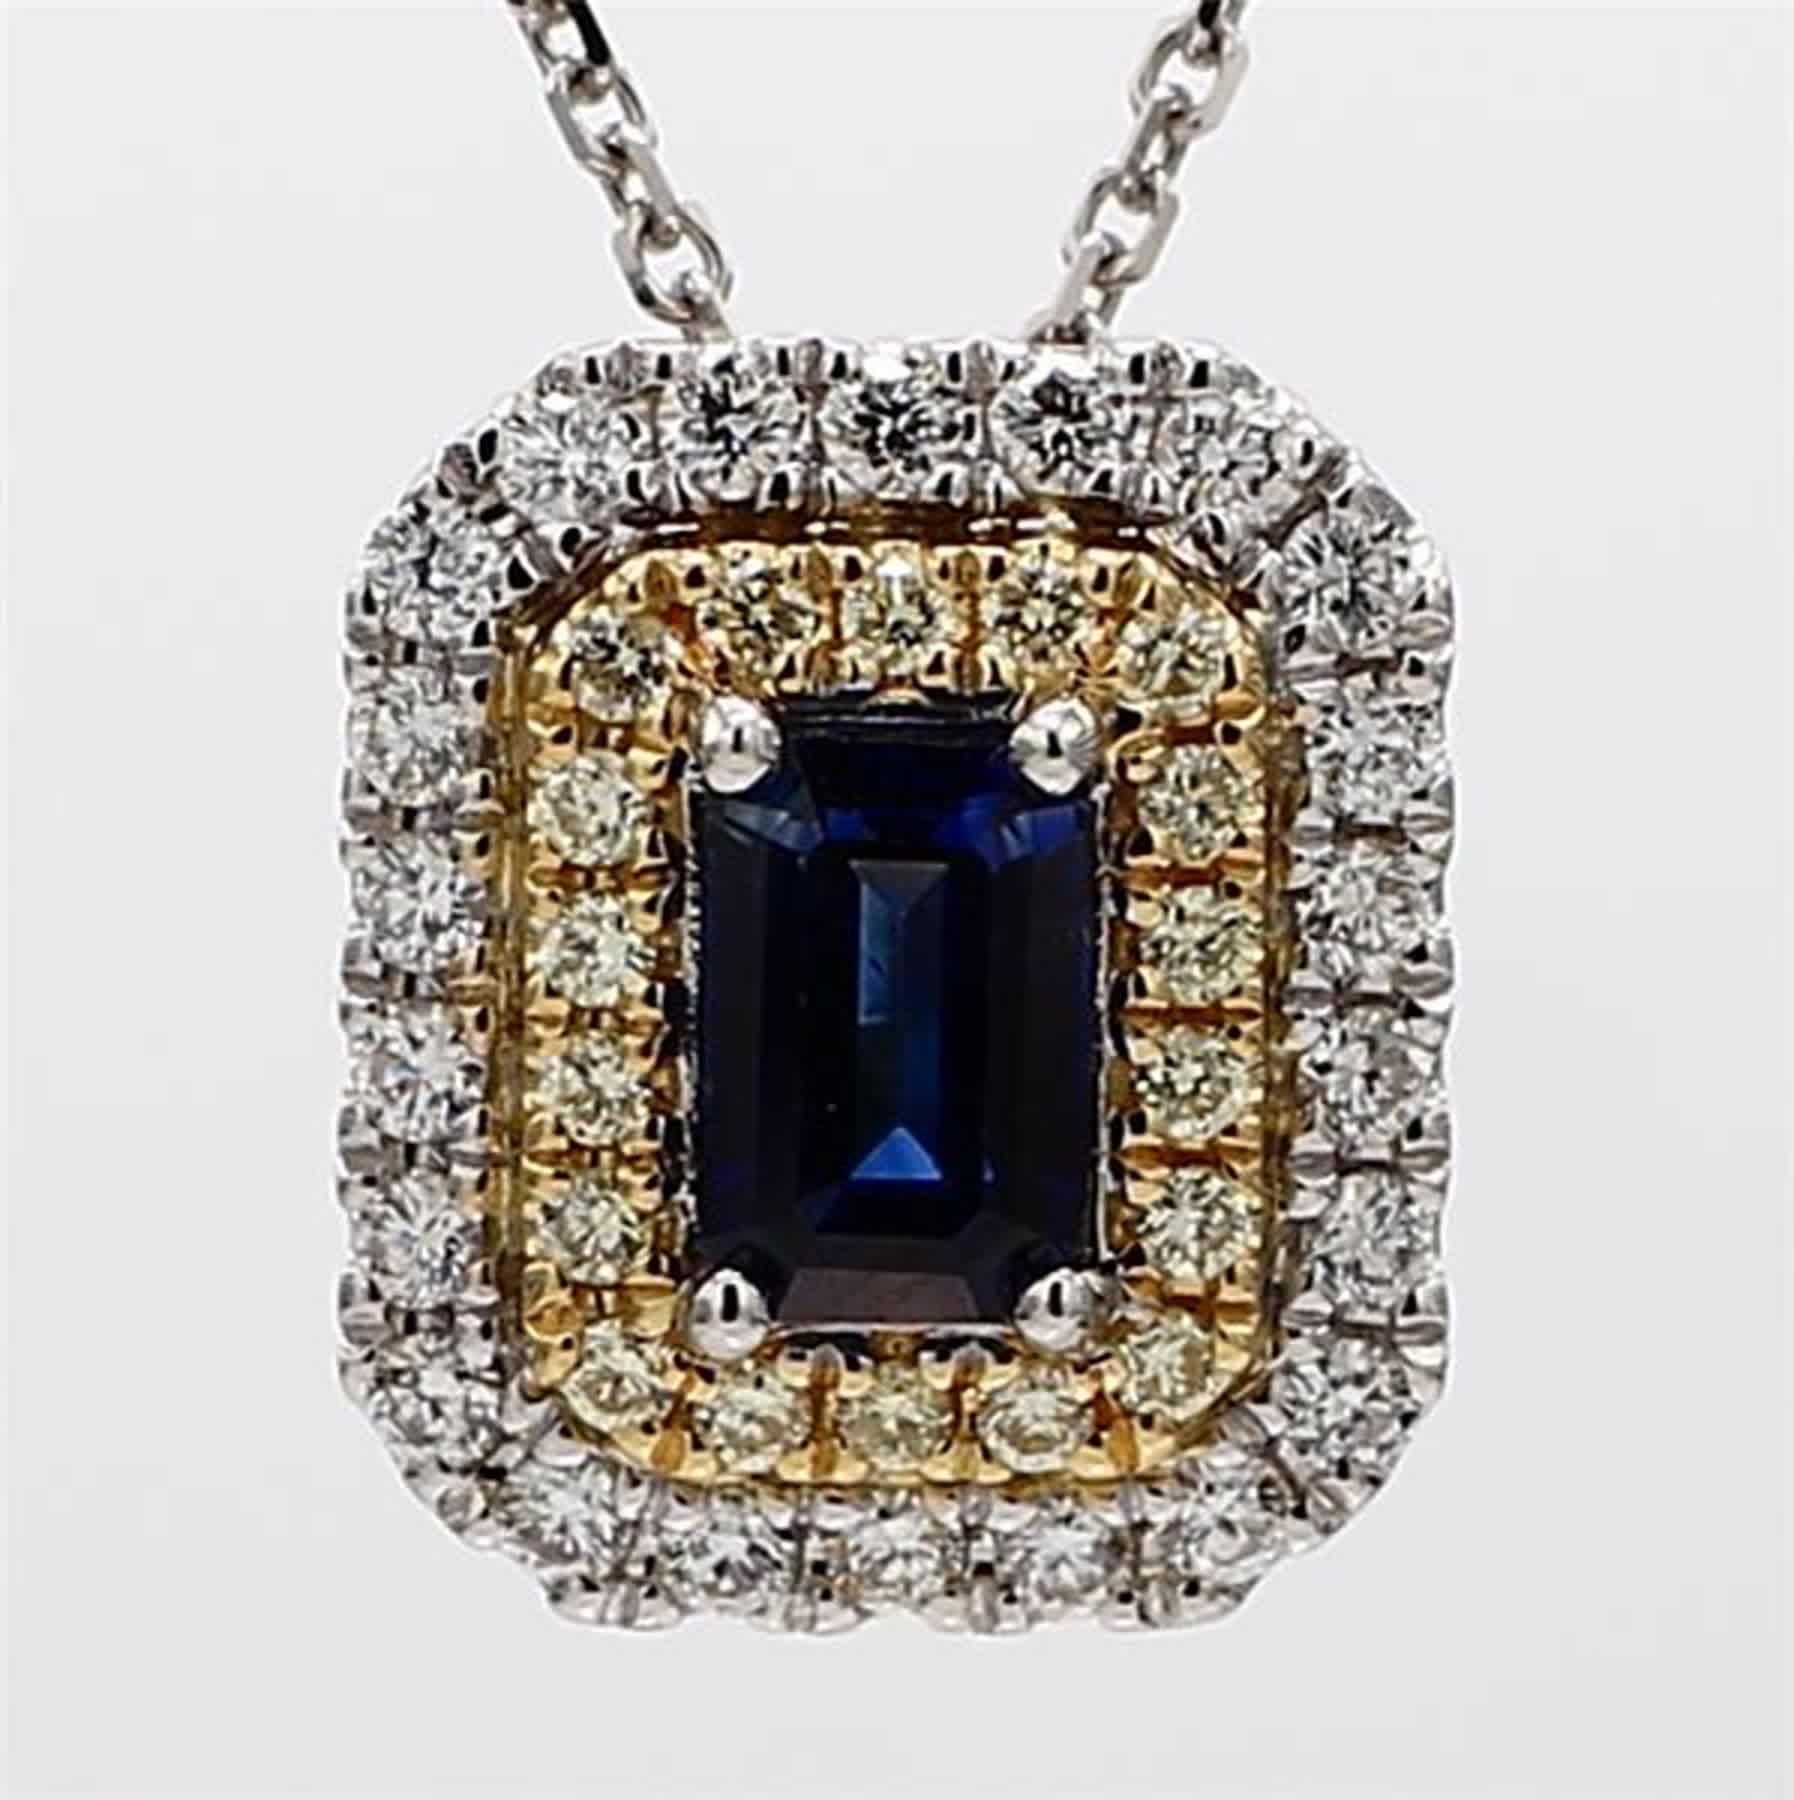 RareGemWorld's classic sapphire pendant. Mounted in a beautiful 18K Yellow and White Gold setting with a natural emerald cut blue sapphire. The sapphire is surrounded by natural round white diamond melee and natural round yellow diamond melee. This